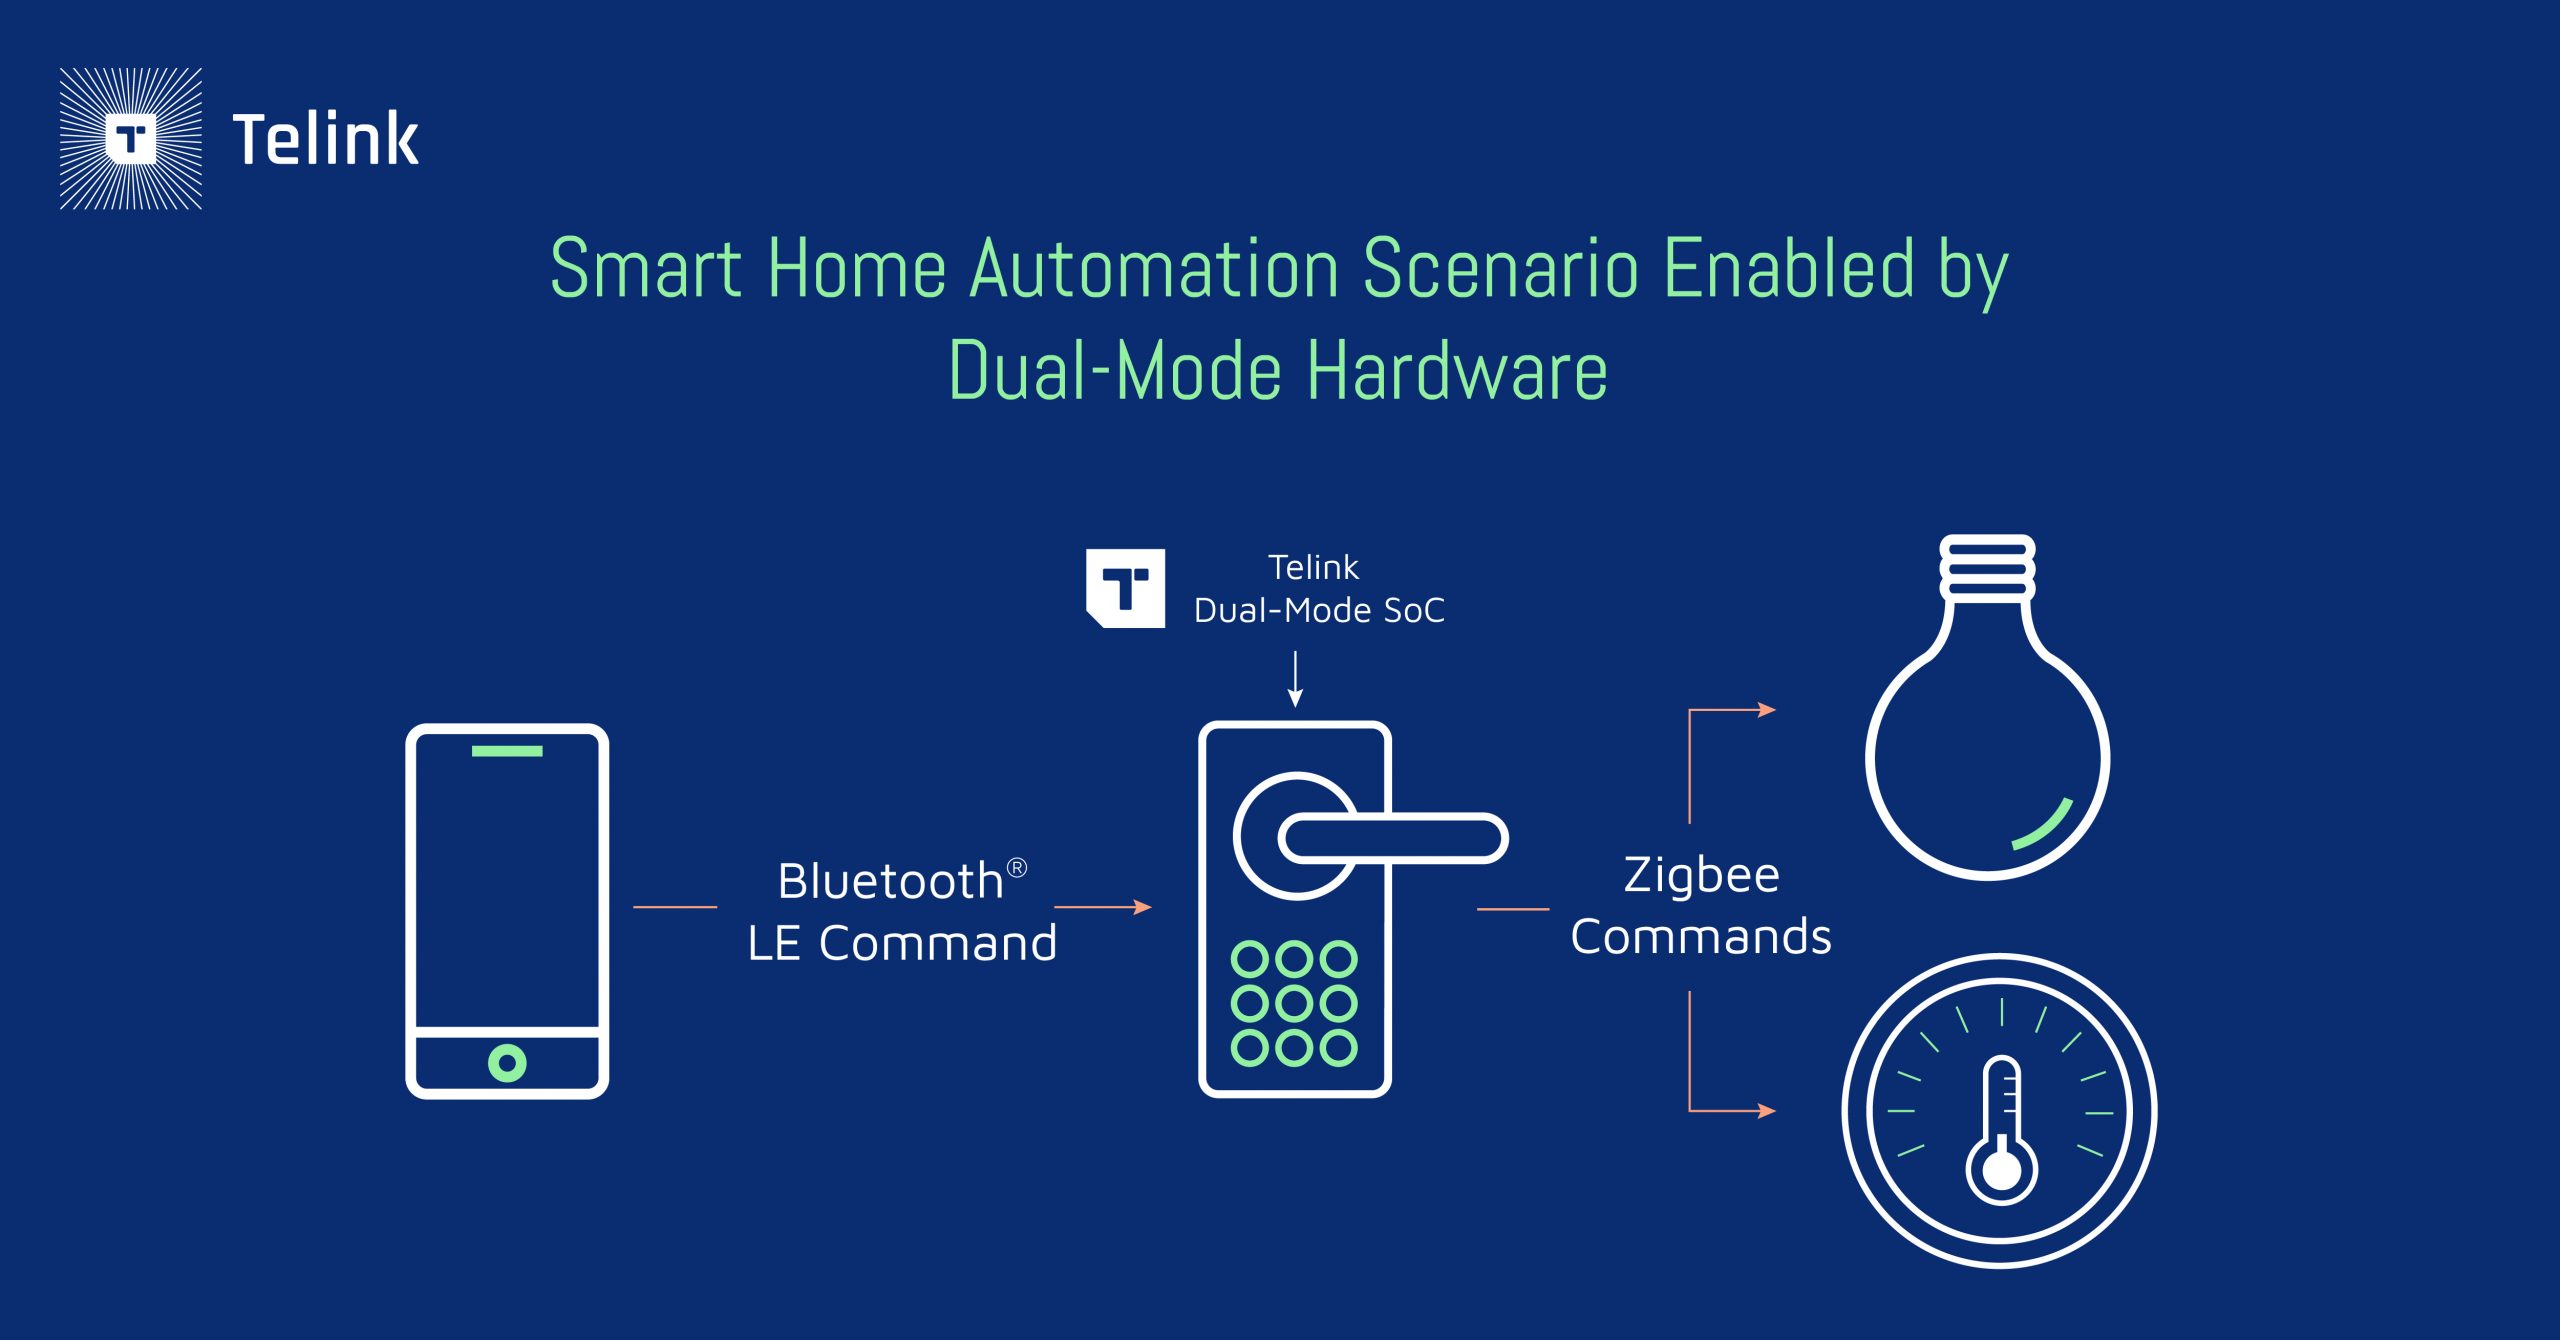 Smart home automation scenario enabled by dual-mode hardware